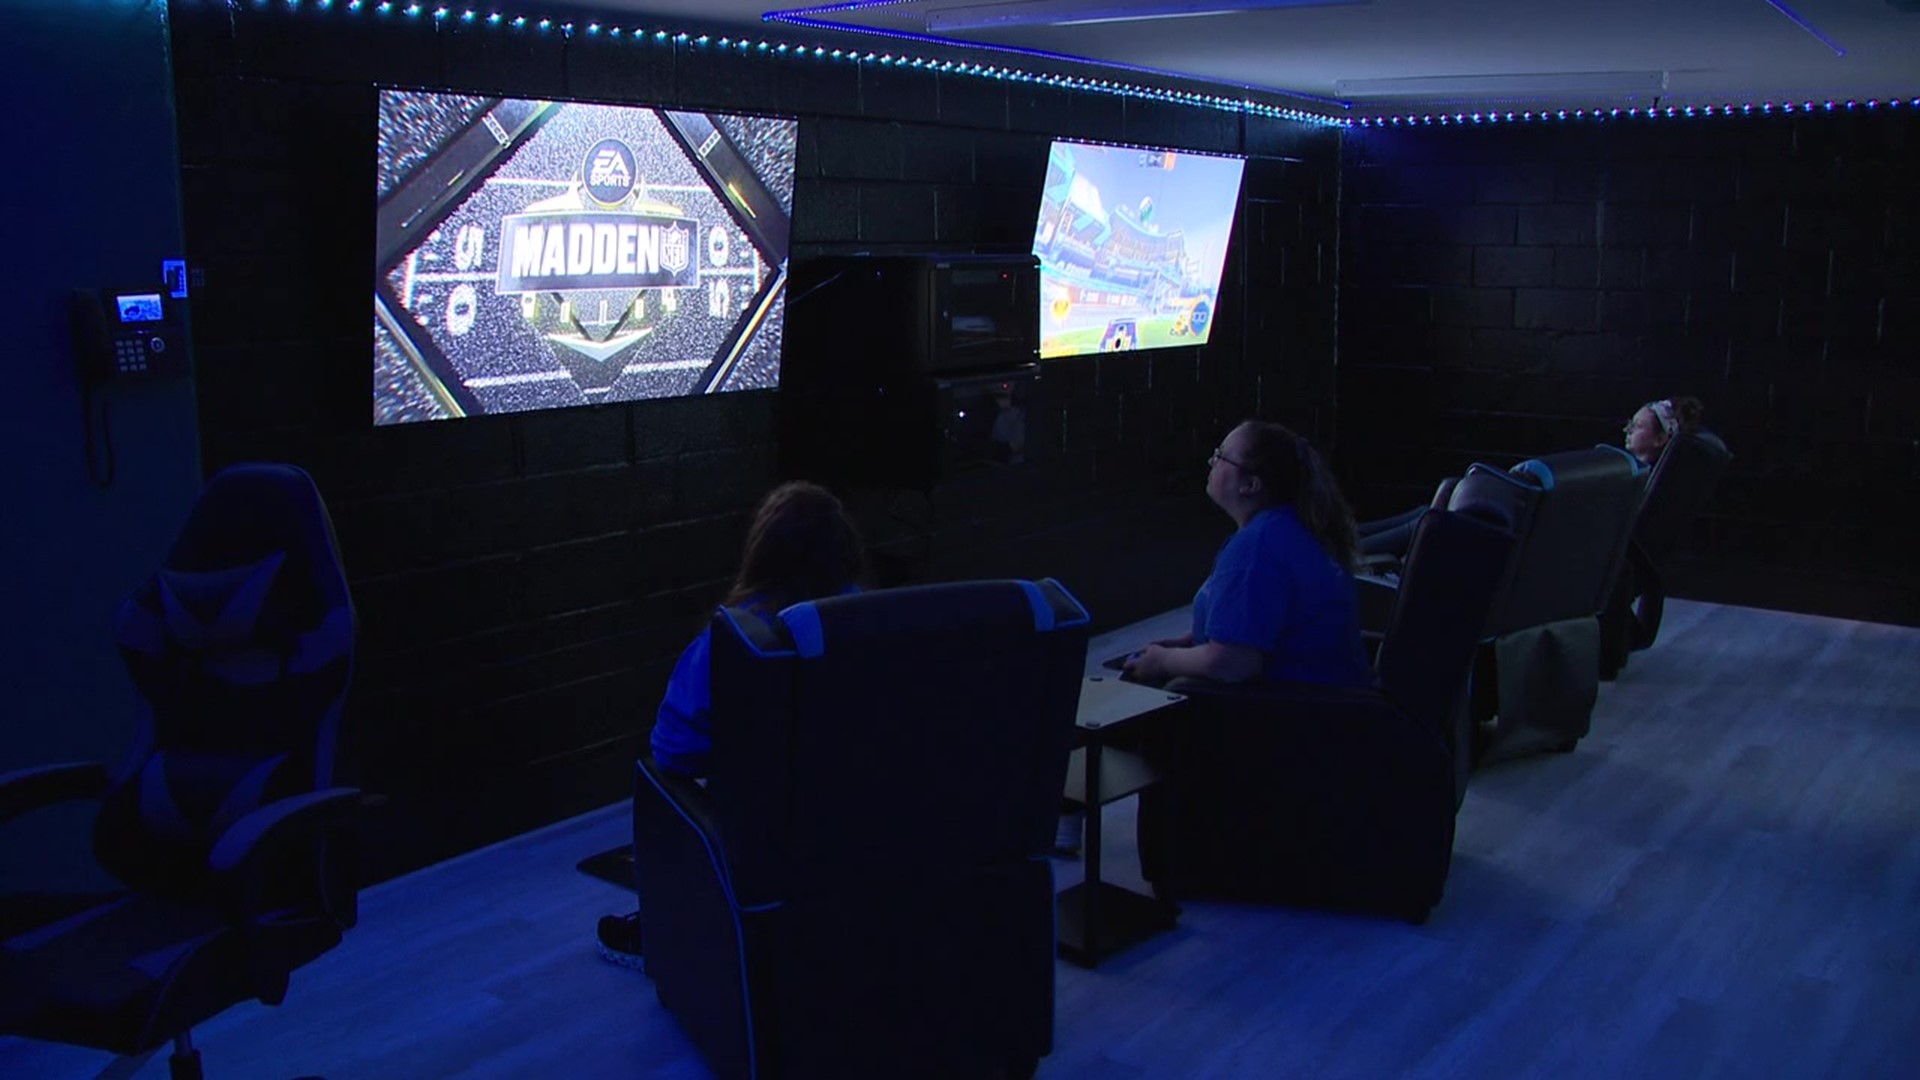 The Milton YMCA is the latest place to get into the esports craze.